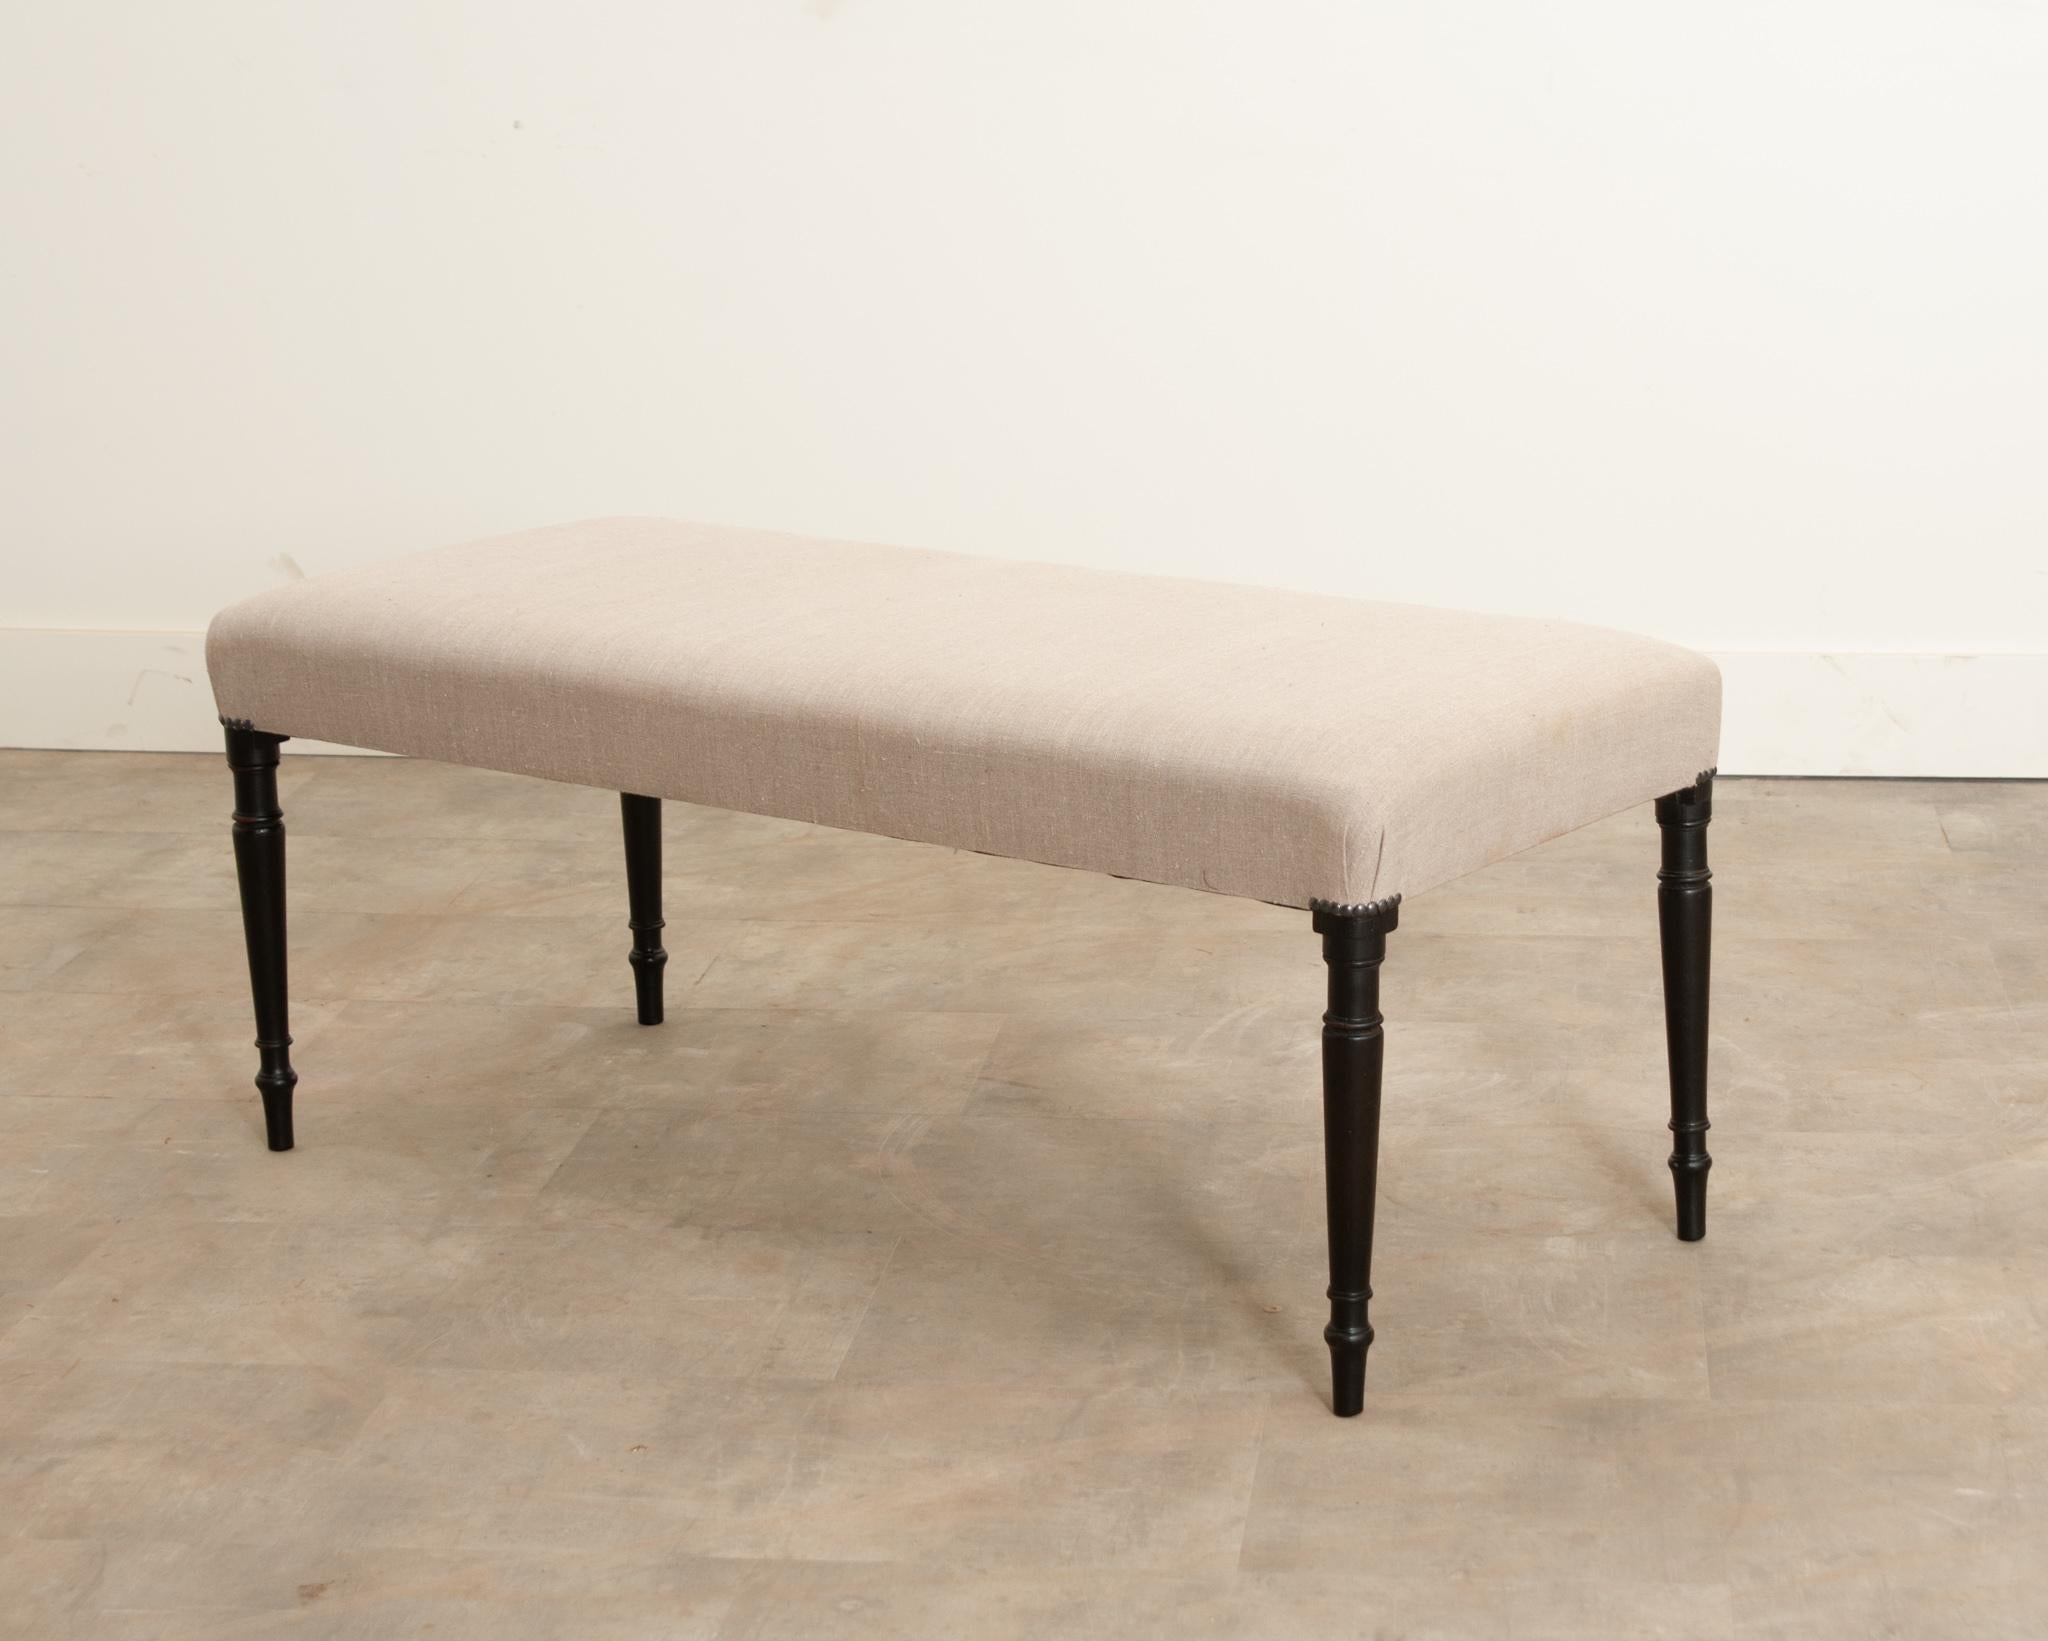 A lovely little bench from 19th century England that goes perfectly with any decor style. Recently upholstered with a wonderful neutral fabric that's fixed to the frame with simple round nail heads. Sleekly turned, ebonized legs support the whole.